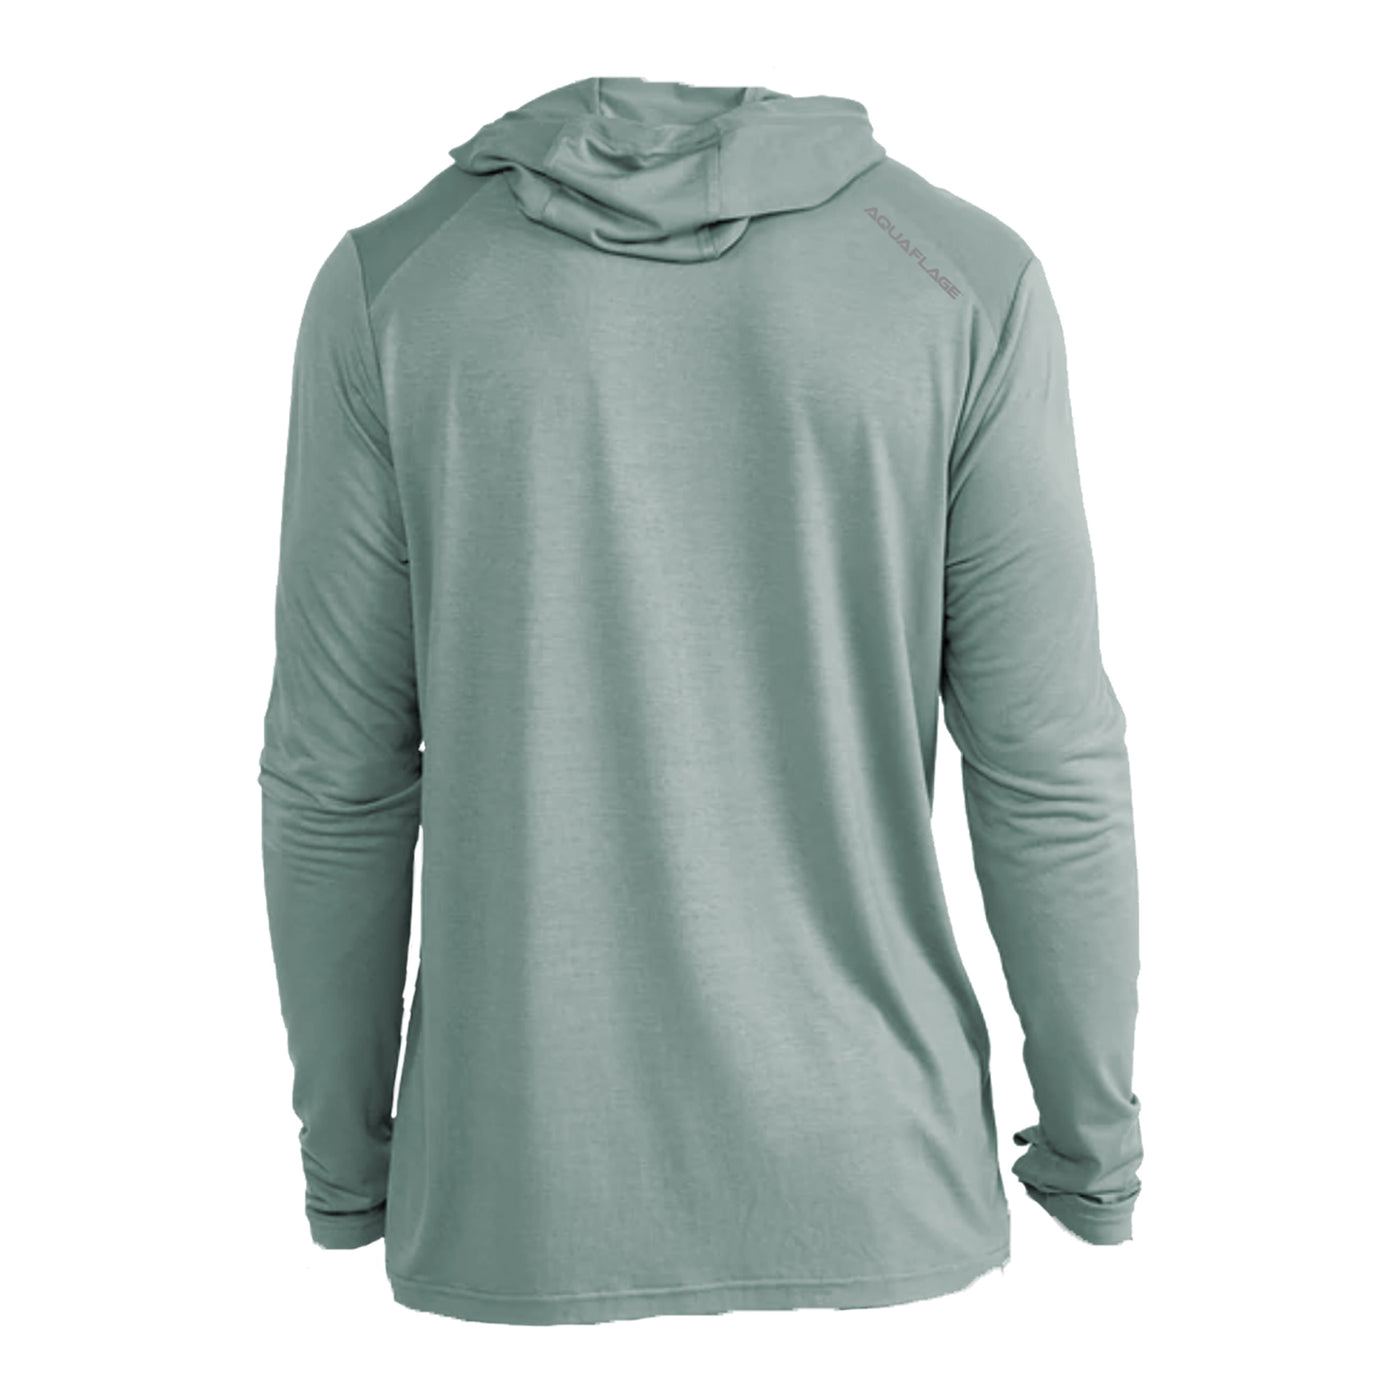 The Clearwater Flex Hoodie - Seaglass